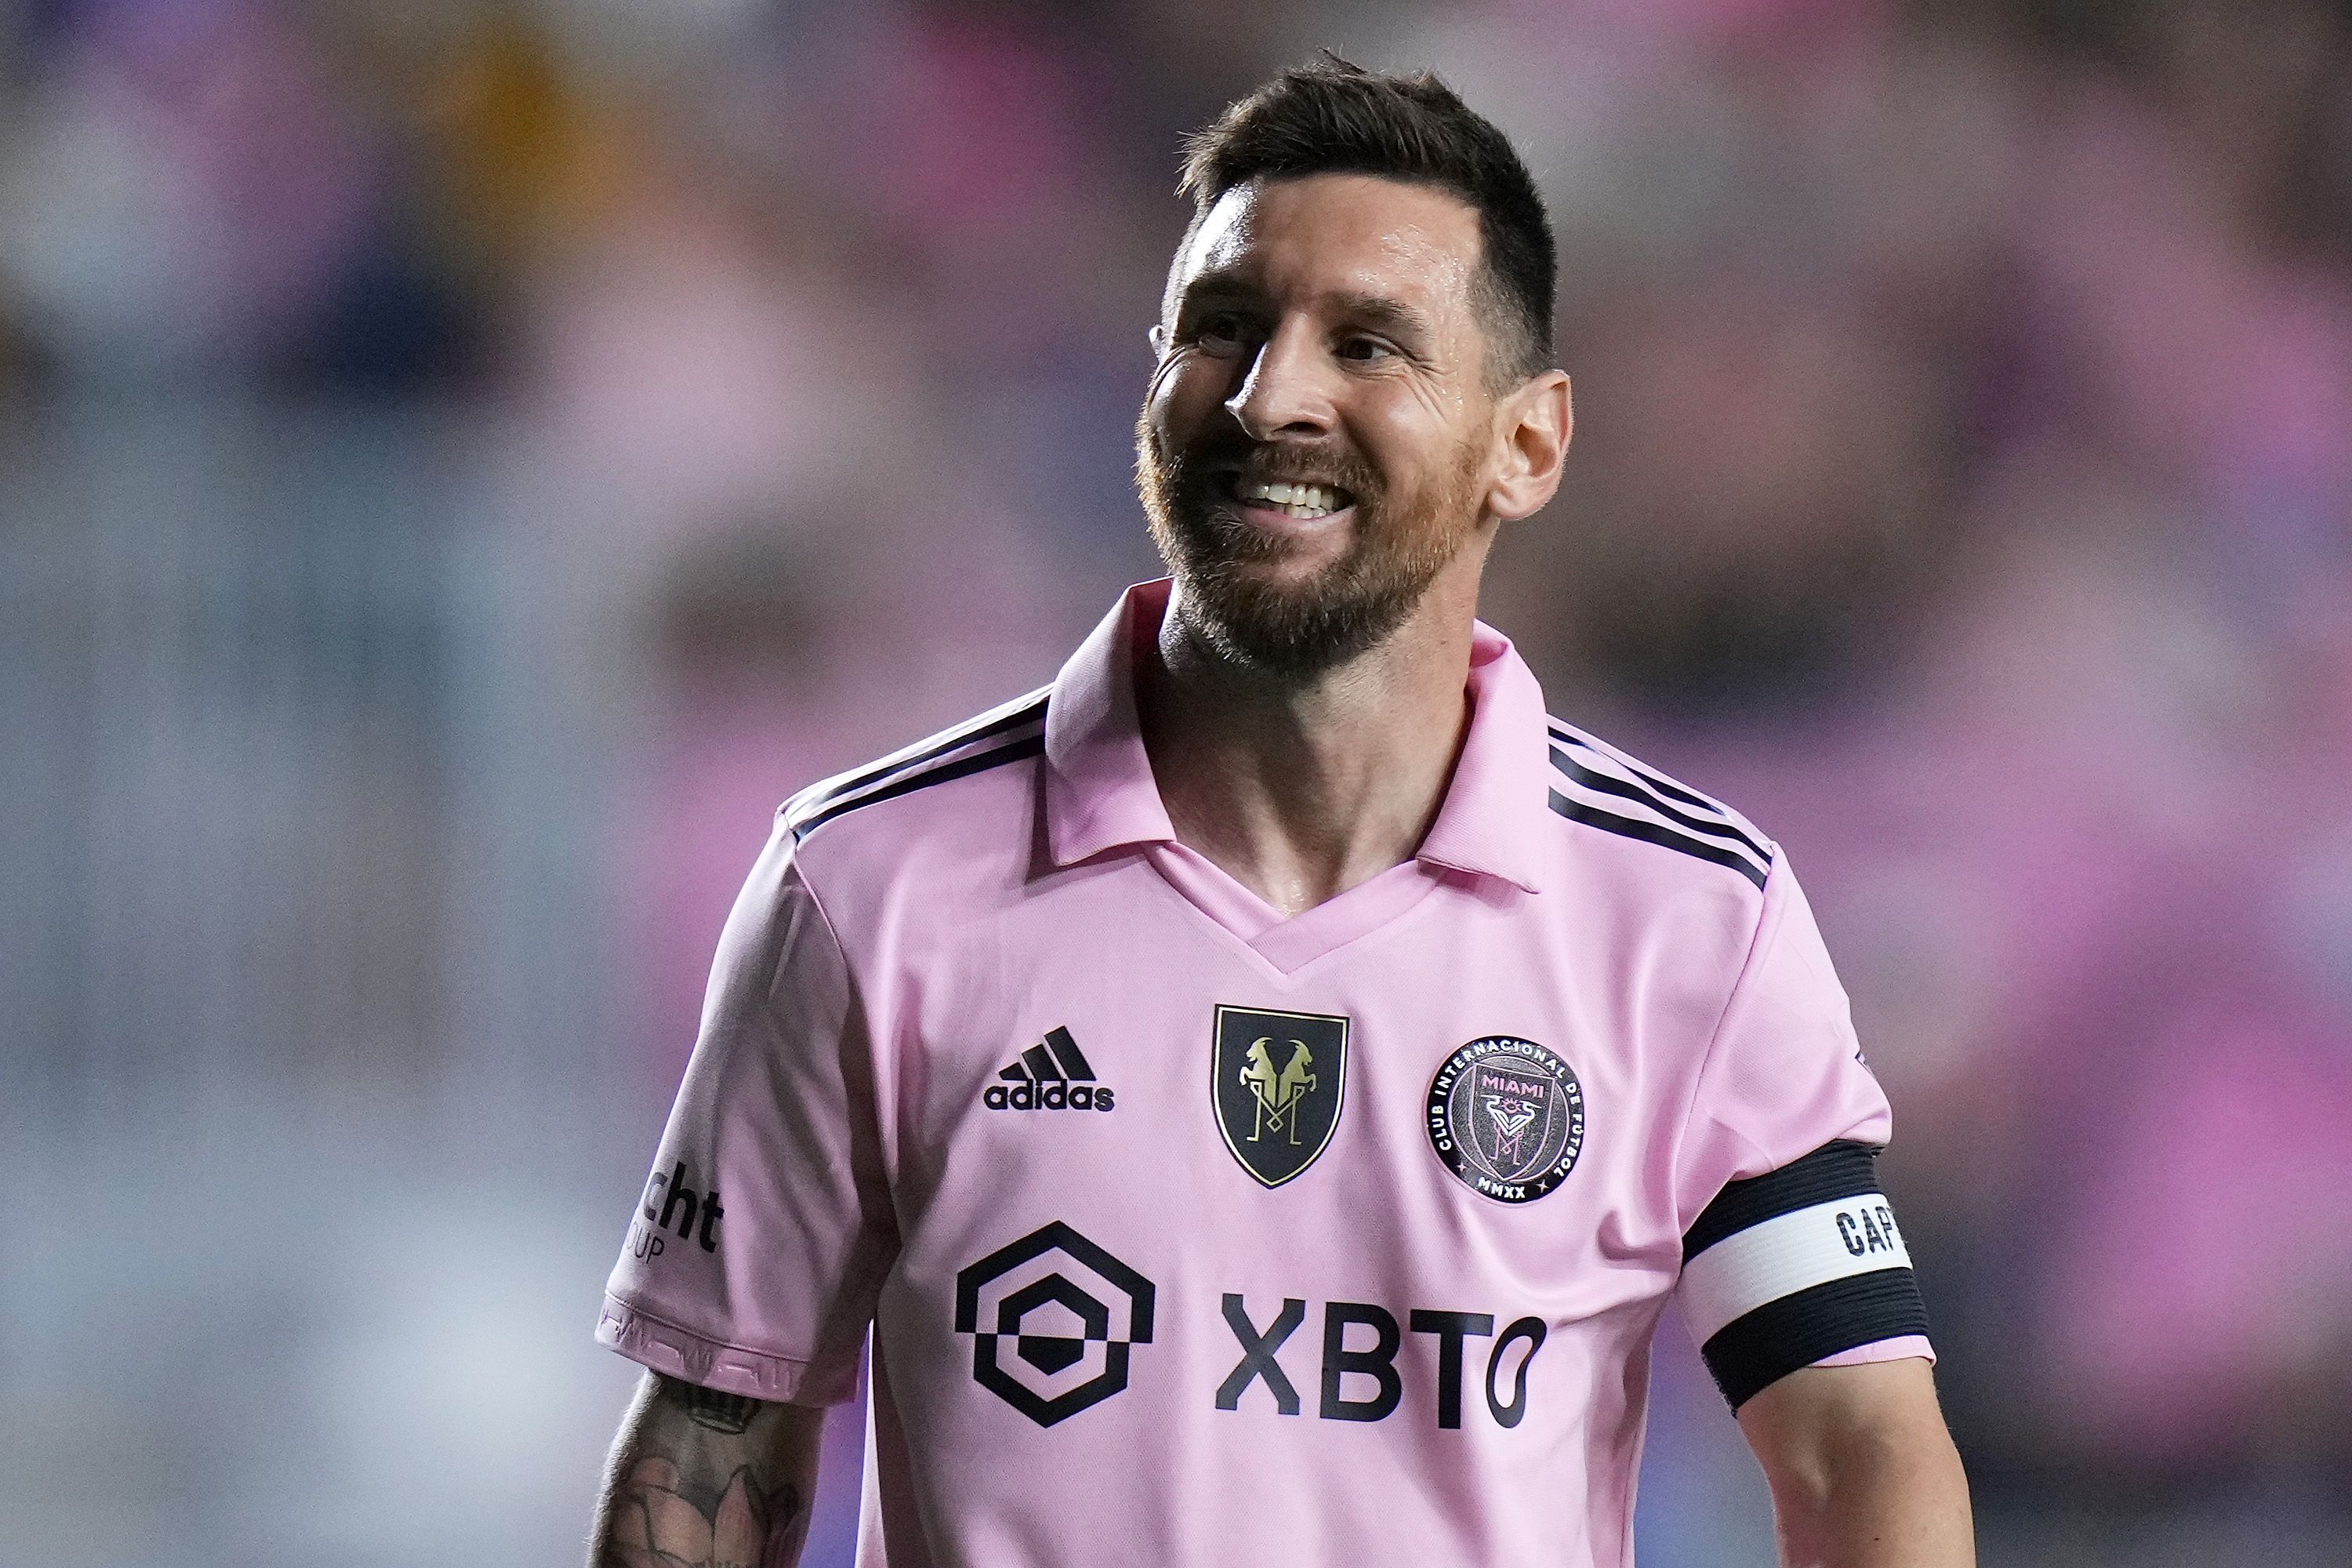 adidas X Lionel Messi shirts have dropped and look great